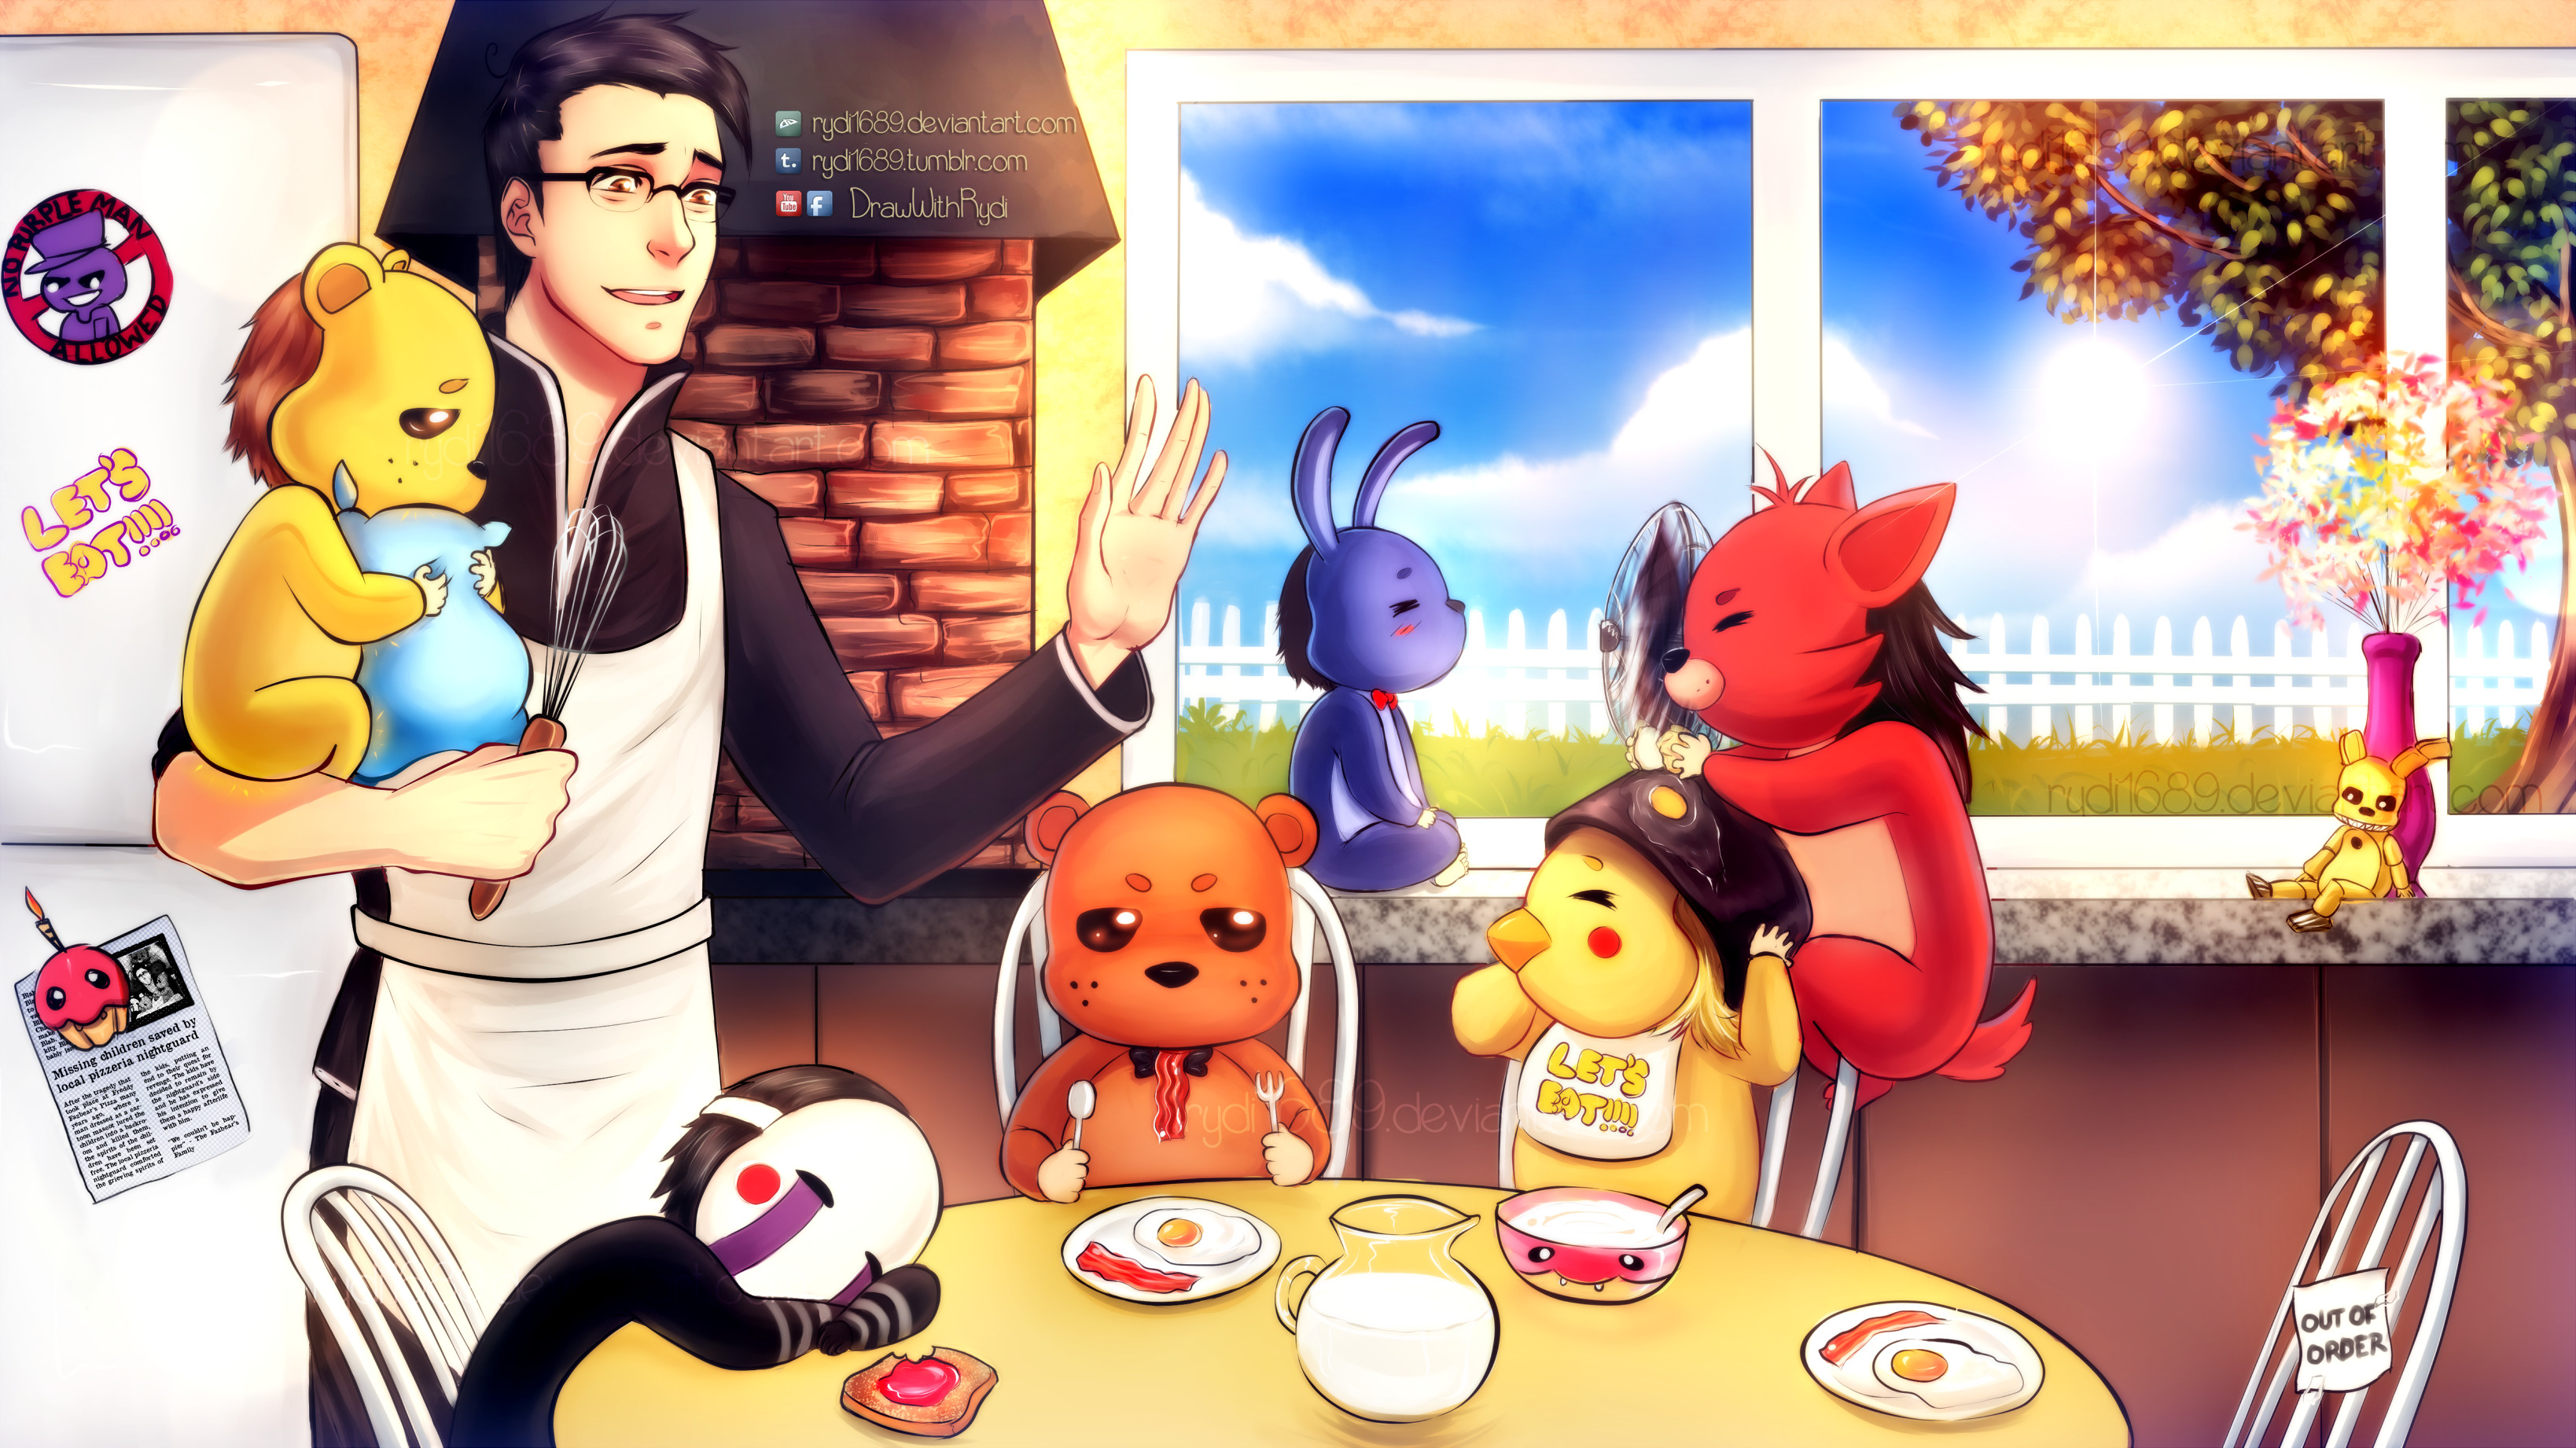 3276x1842 ... Markiplier is the father of Five Nights at Freddys by rydi1689